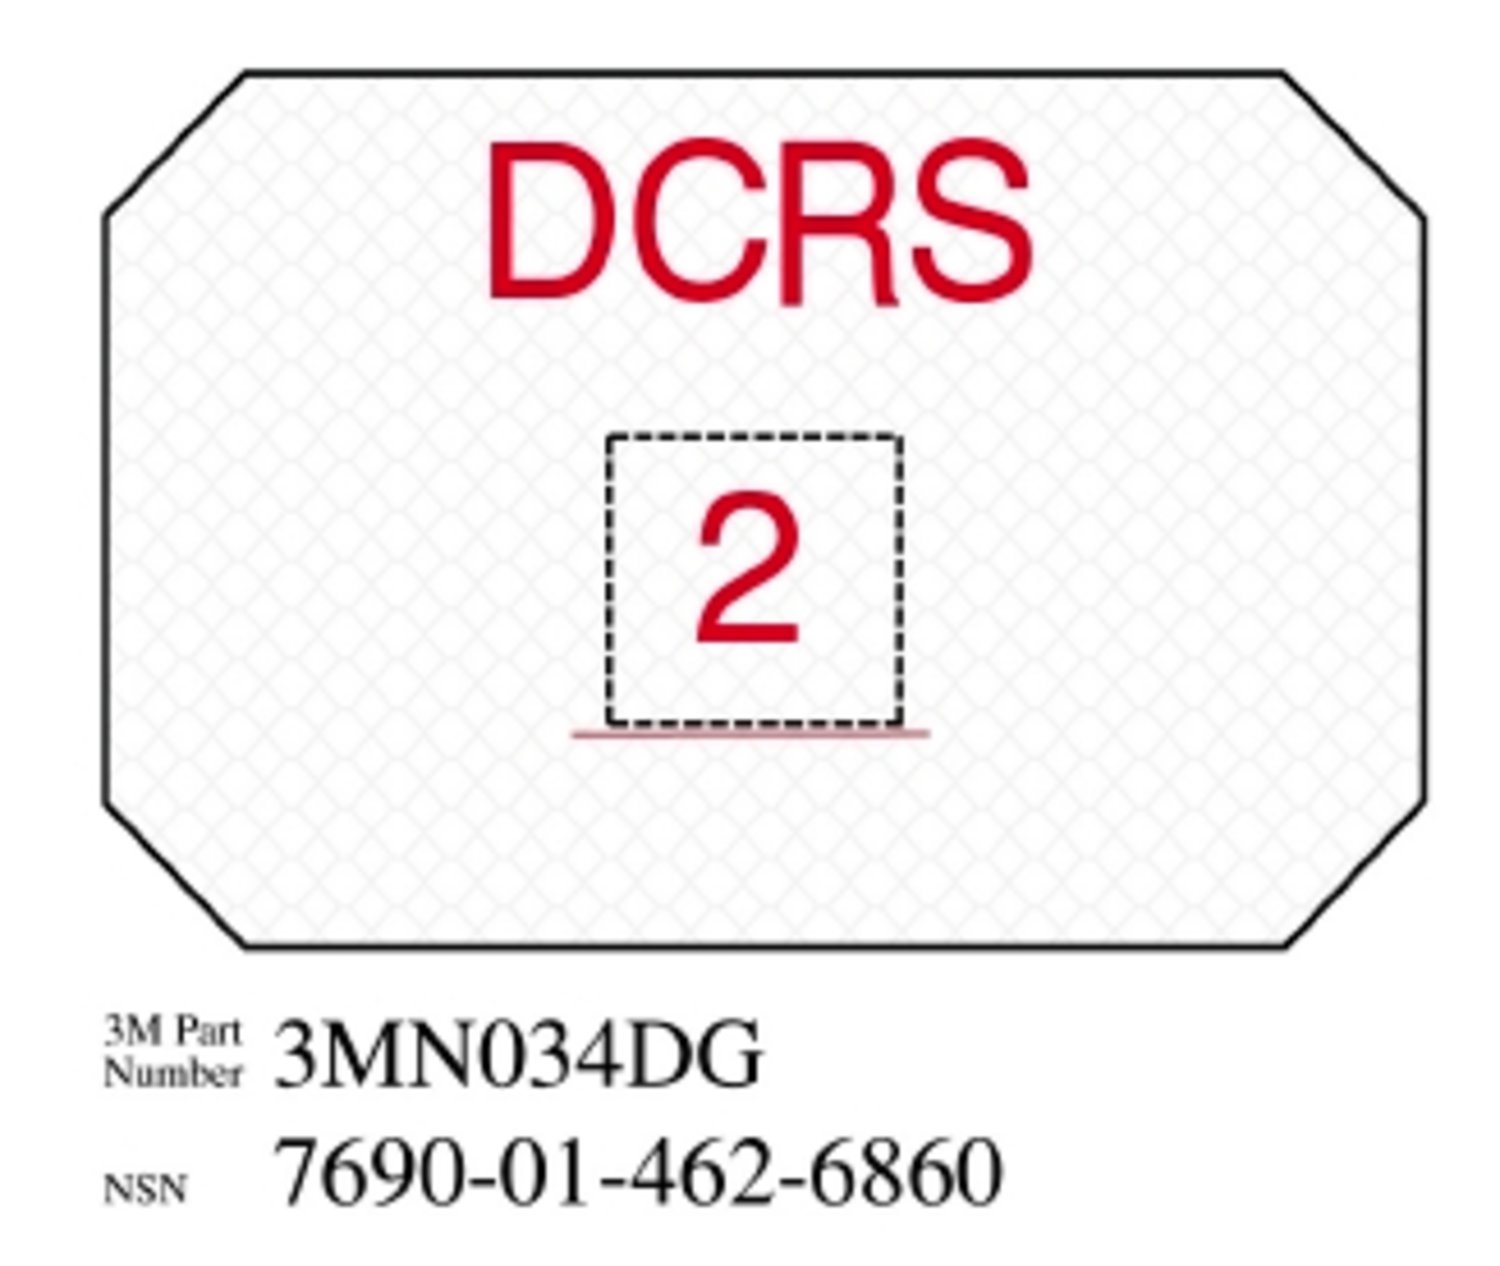 7010388579 - 3M Diamond Grade Damage Control Sign 3MN034DG, "DCRS", 8 in x 12 in,
10/Package